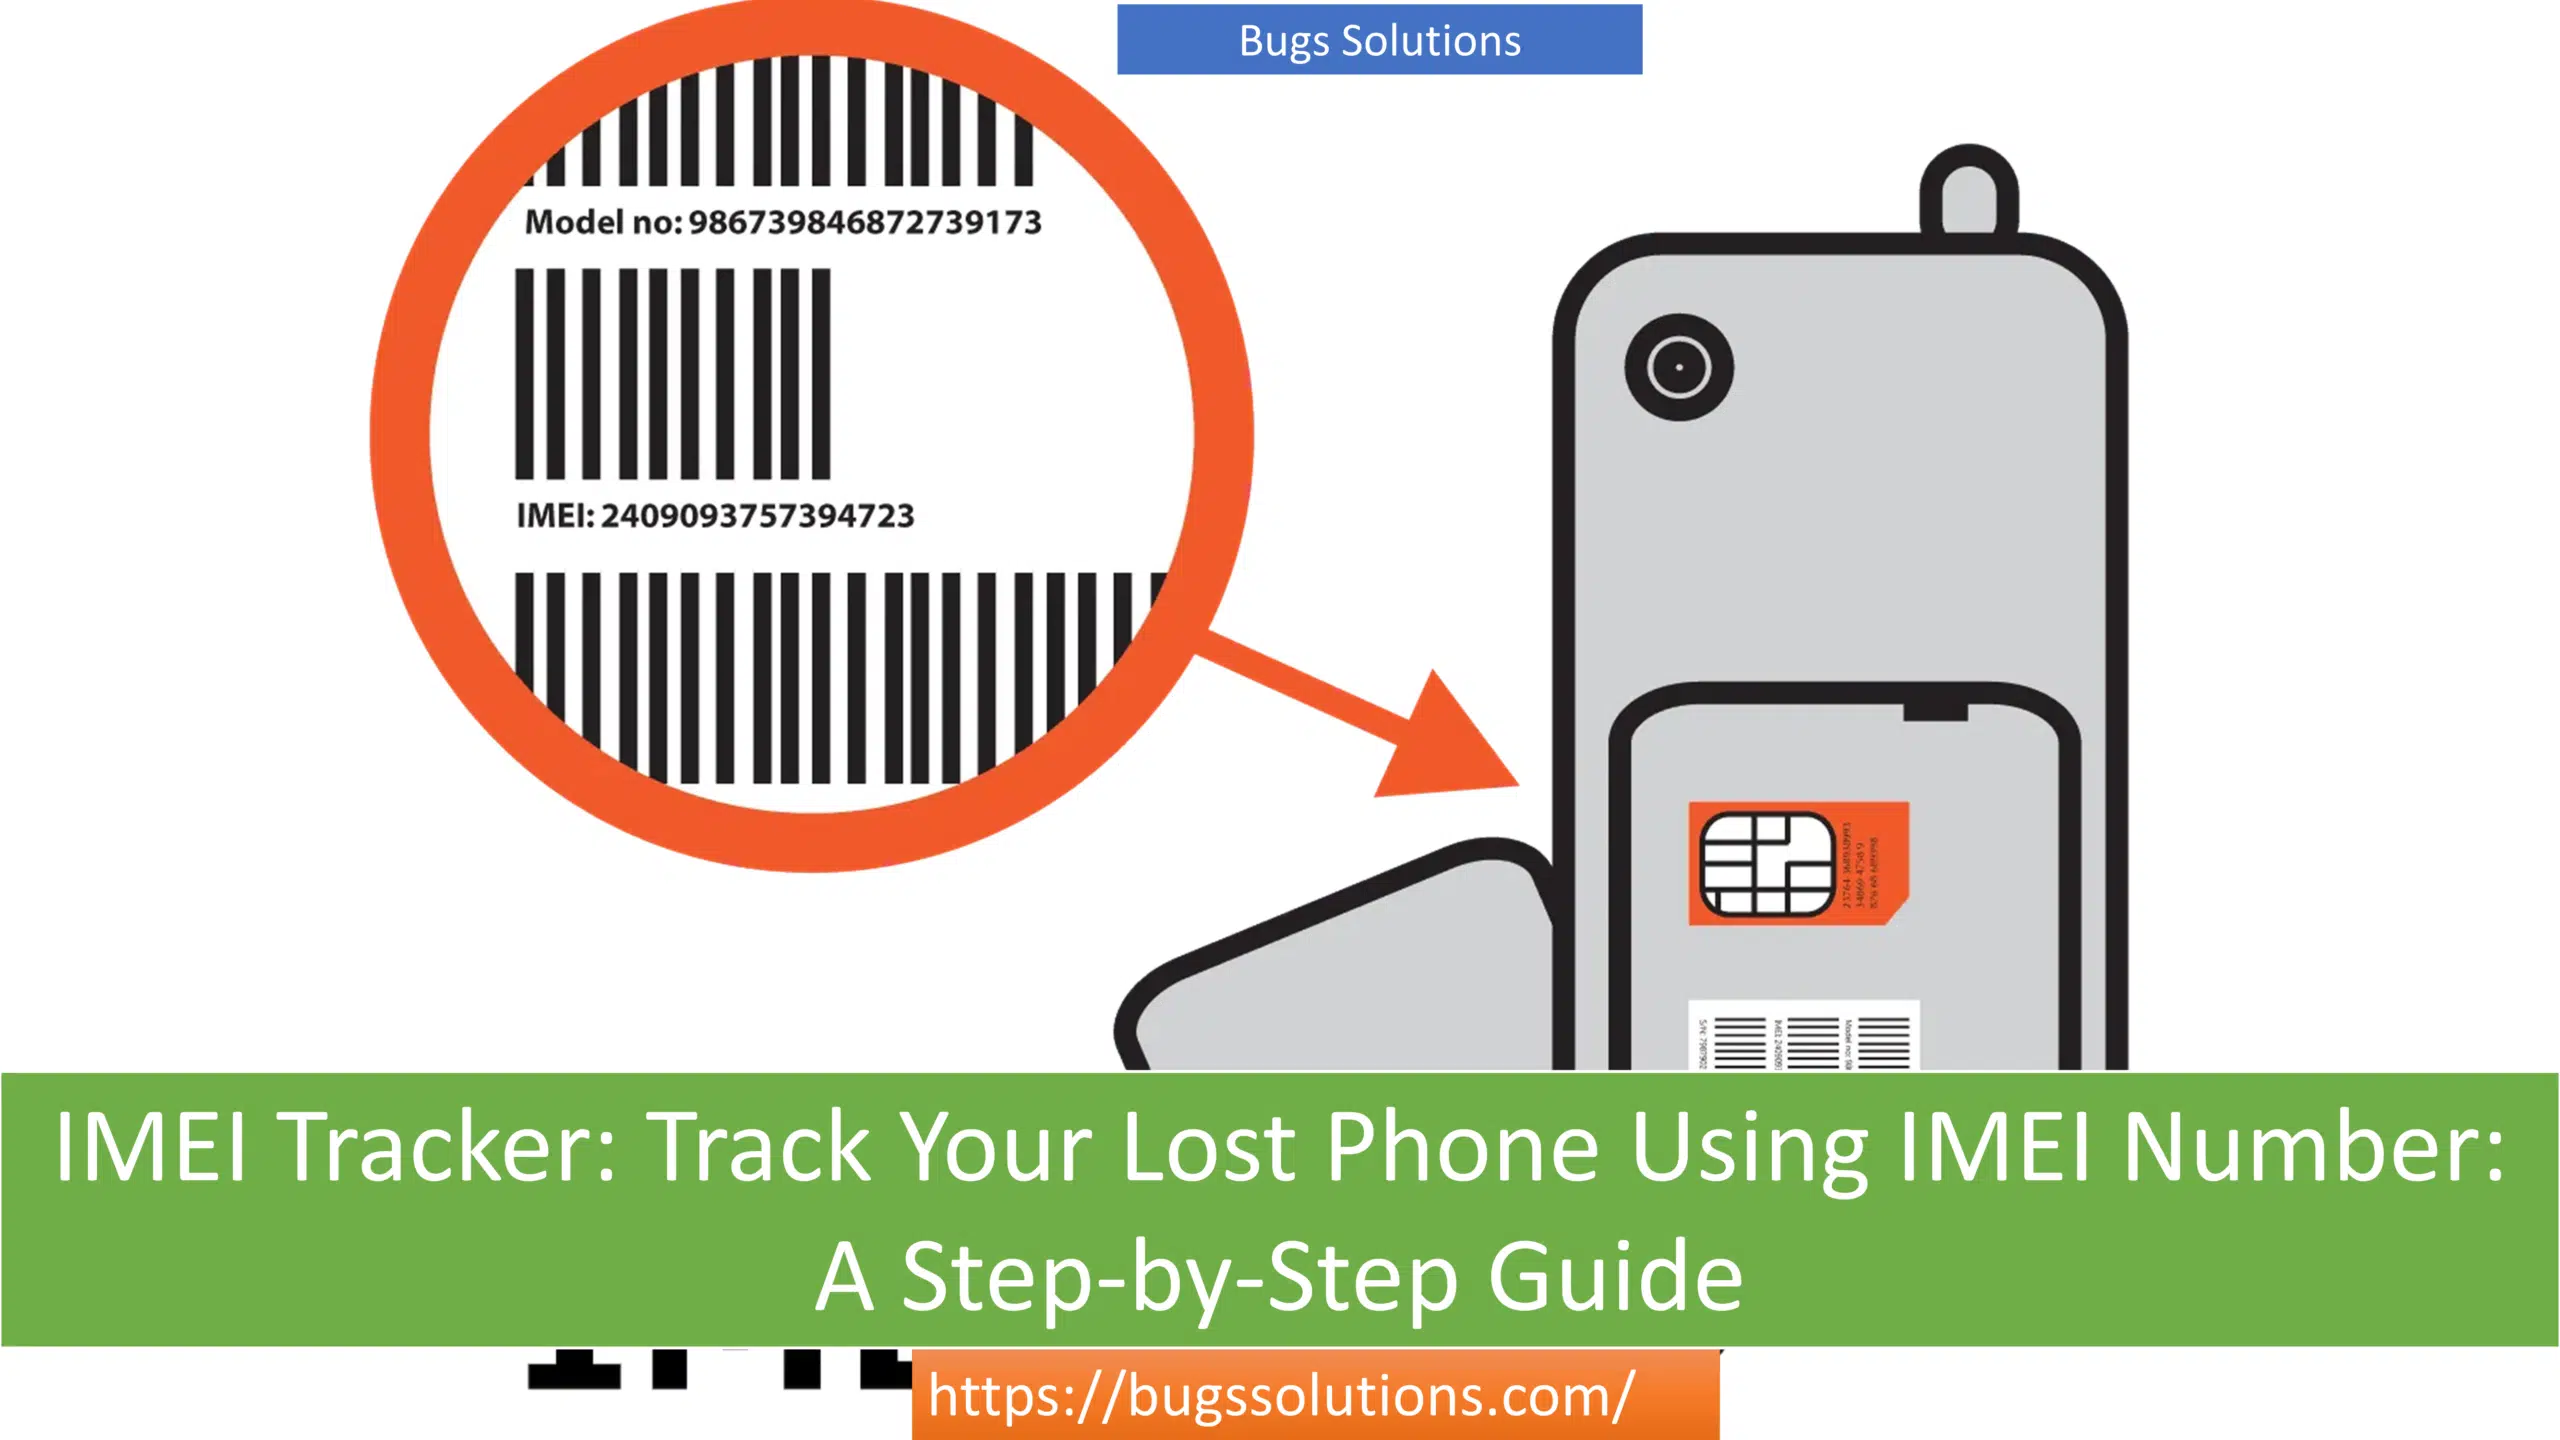 IMEI Tracker: Track Your Lost Phone Using IMEI Number: A Step-by-Step Guide